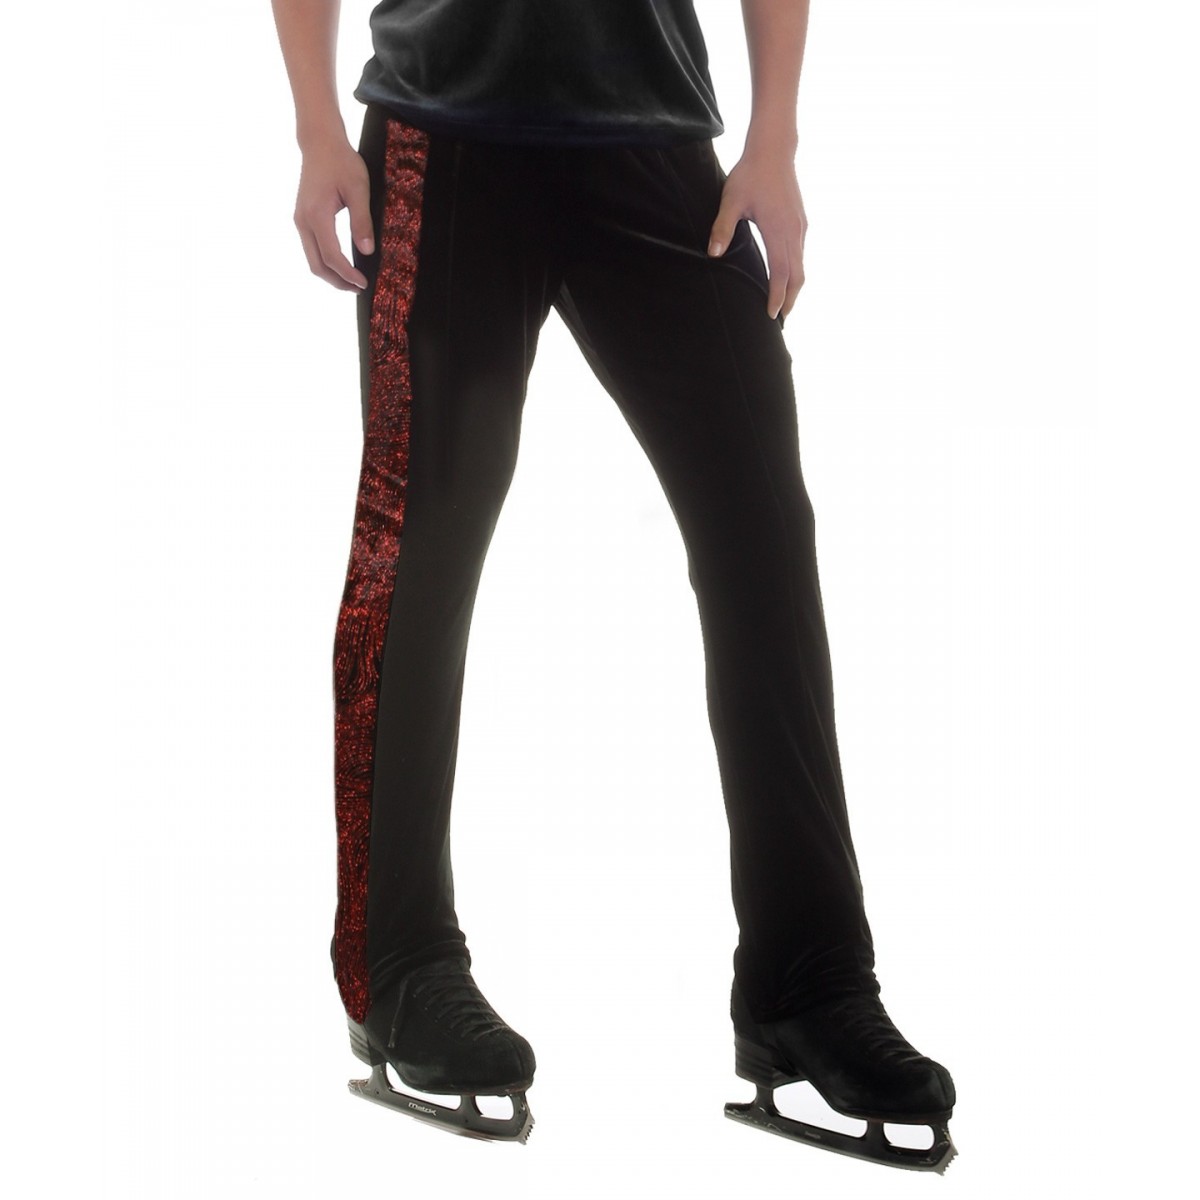 Black long pants with red swirl taping - figure skating